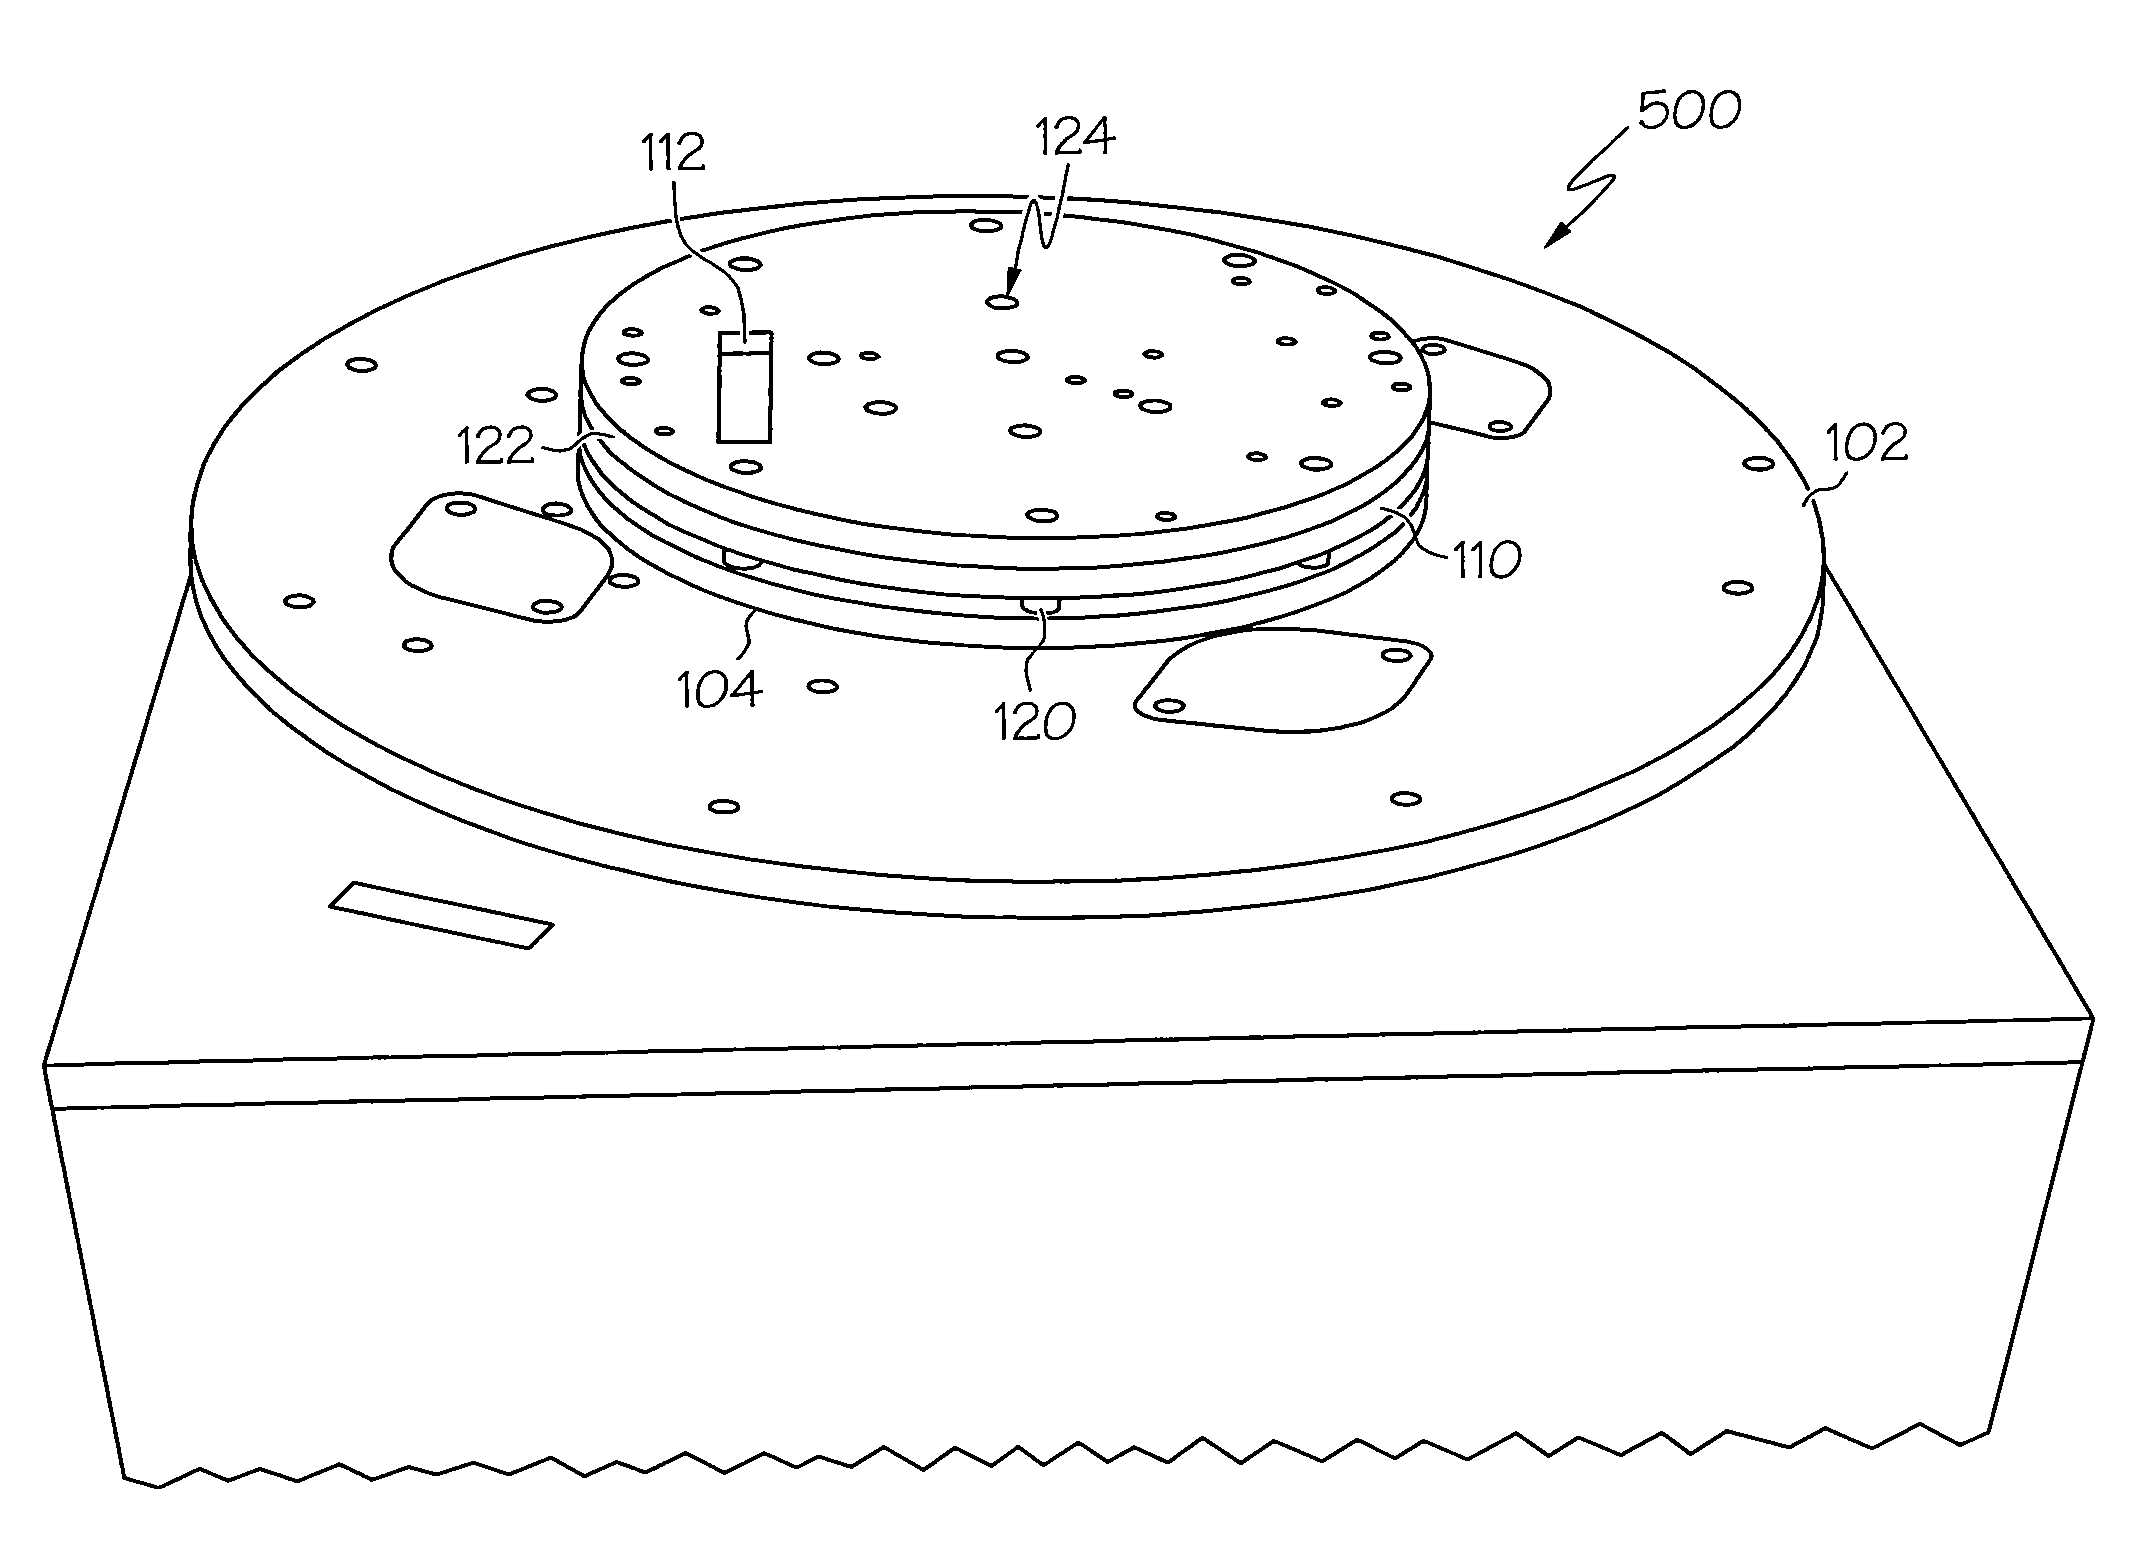 System and method for inducing a pyrotechnic type shock event